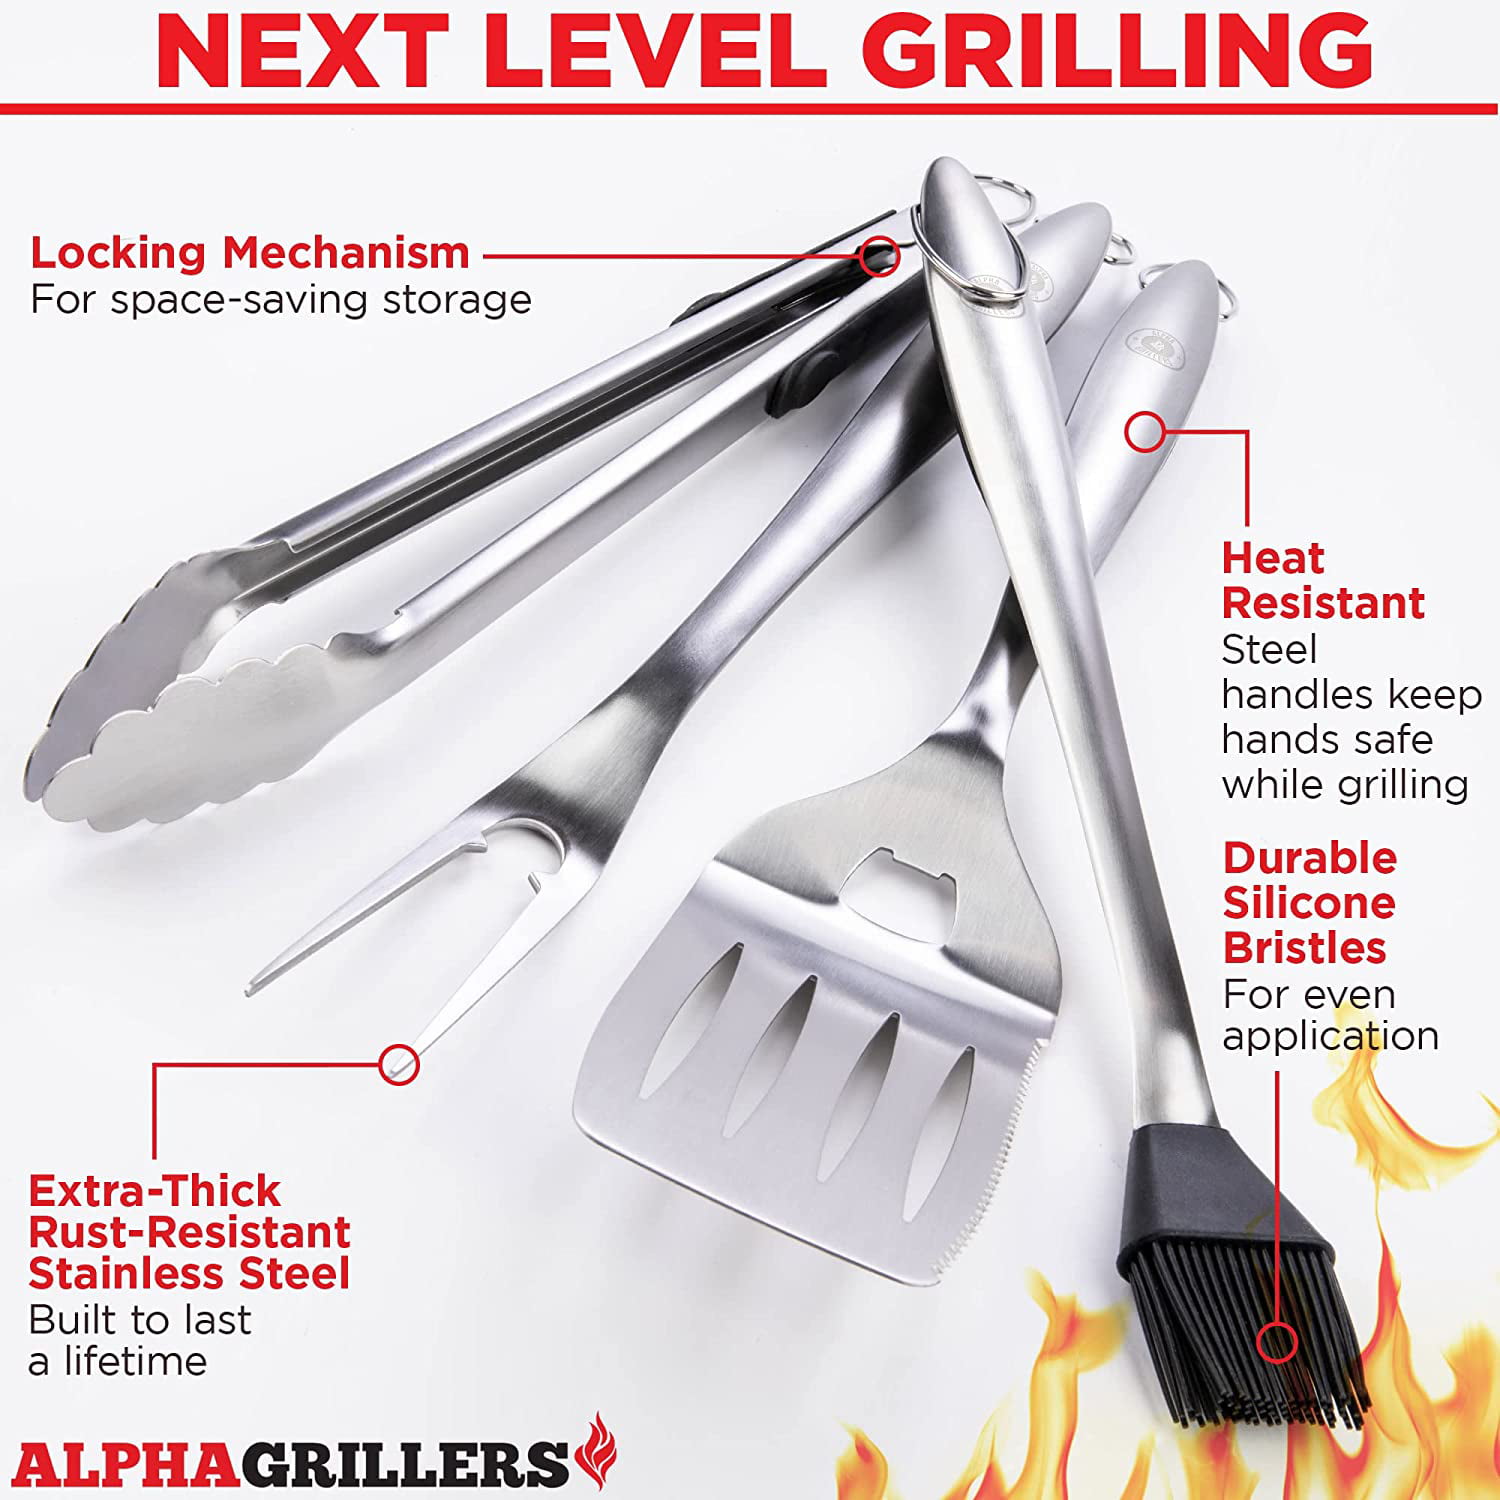 Alpha Grillers Grill Set Heavy Duty BBQ Accessories - BBQ Gifts Tool Set  4pc Grill Accessories with Spatula, Fork, Brush & BBQ Tongs - Grilling  Cooking Gifts for Men Dad Durable, Stainless Steel Grill Tool Set 